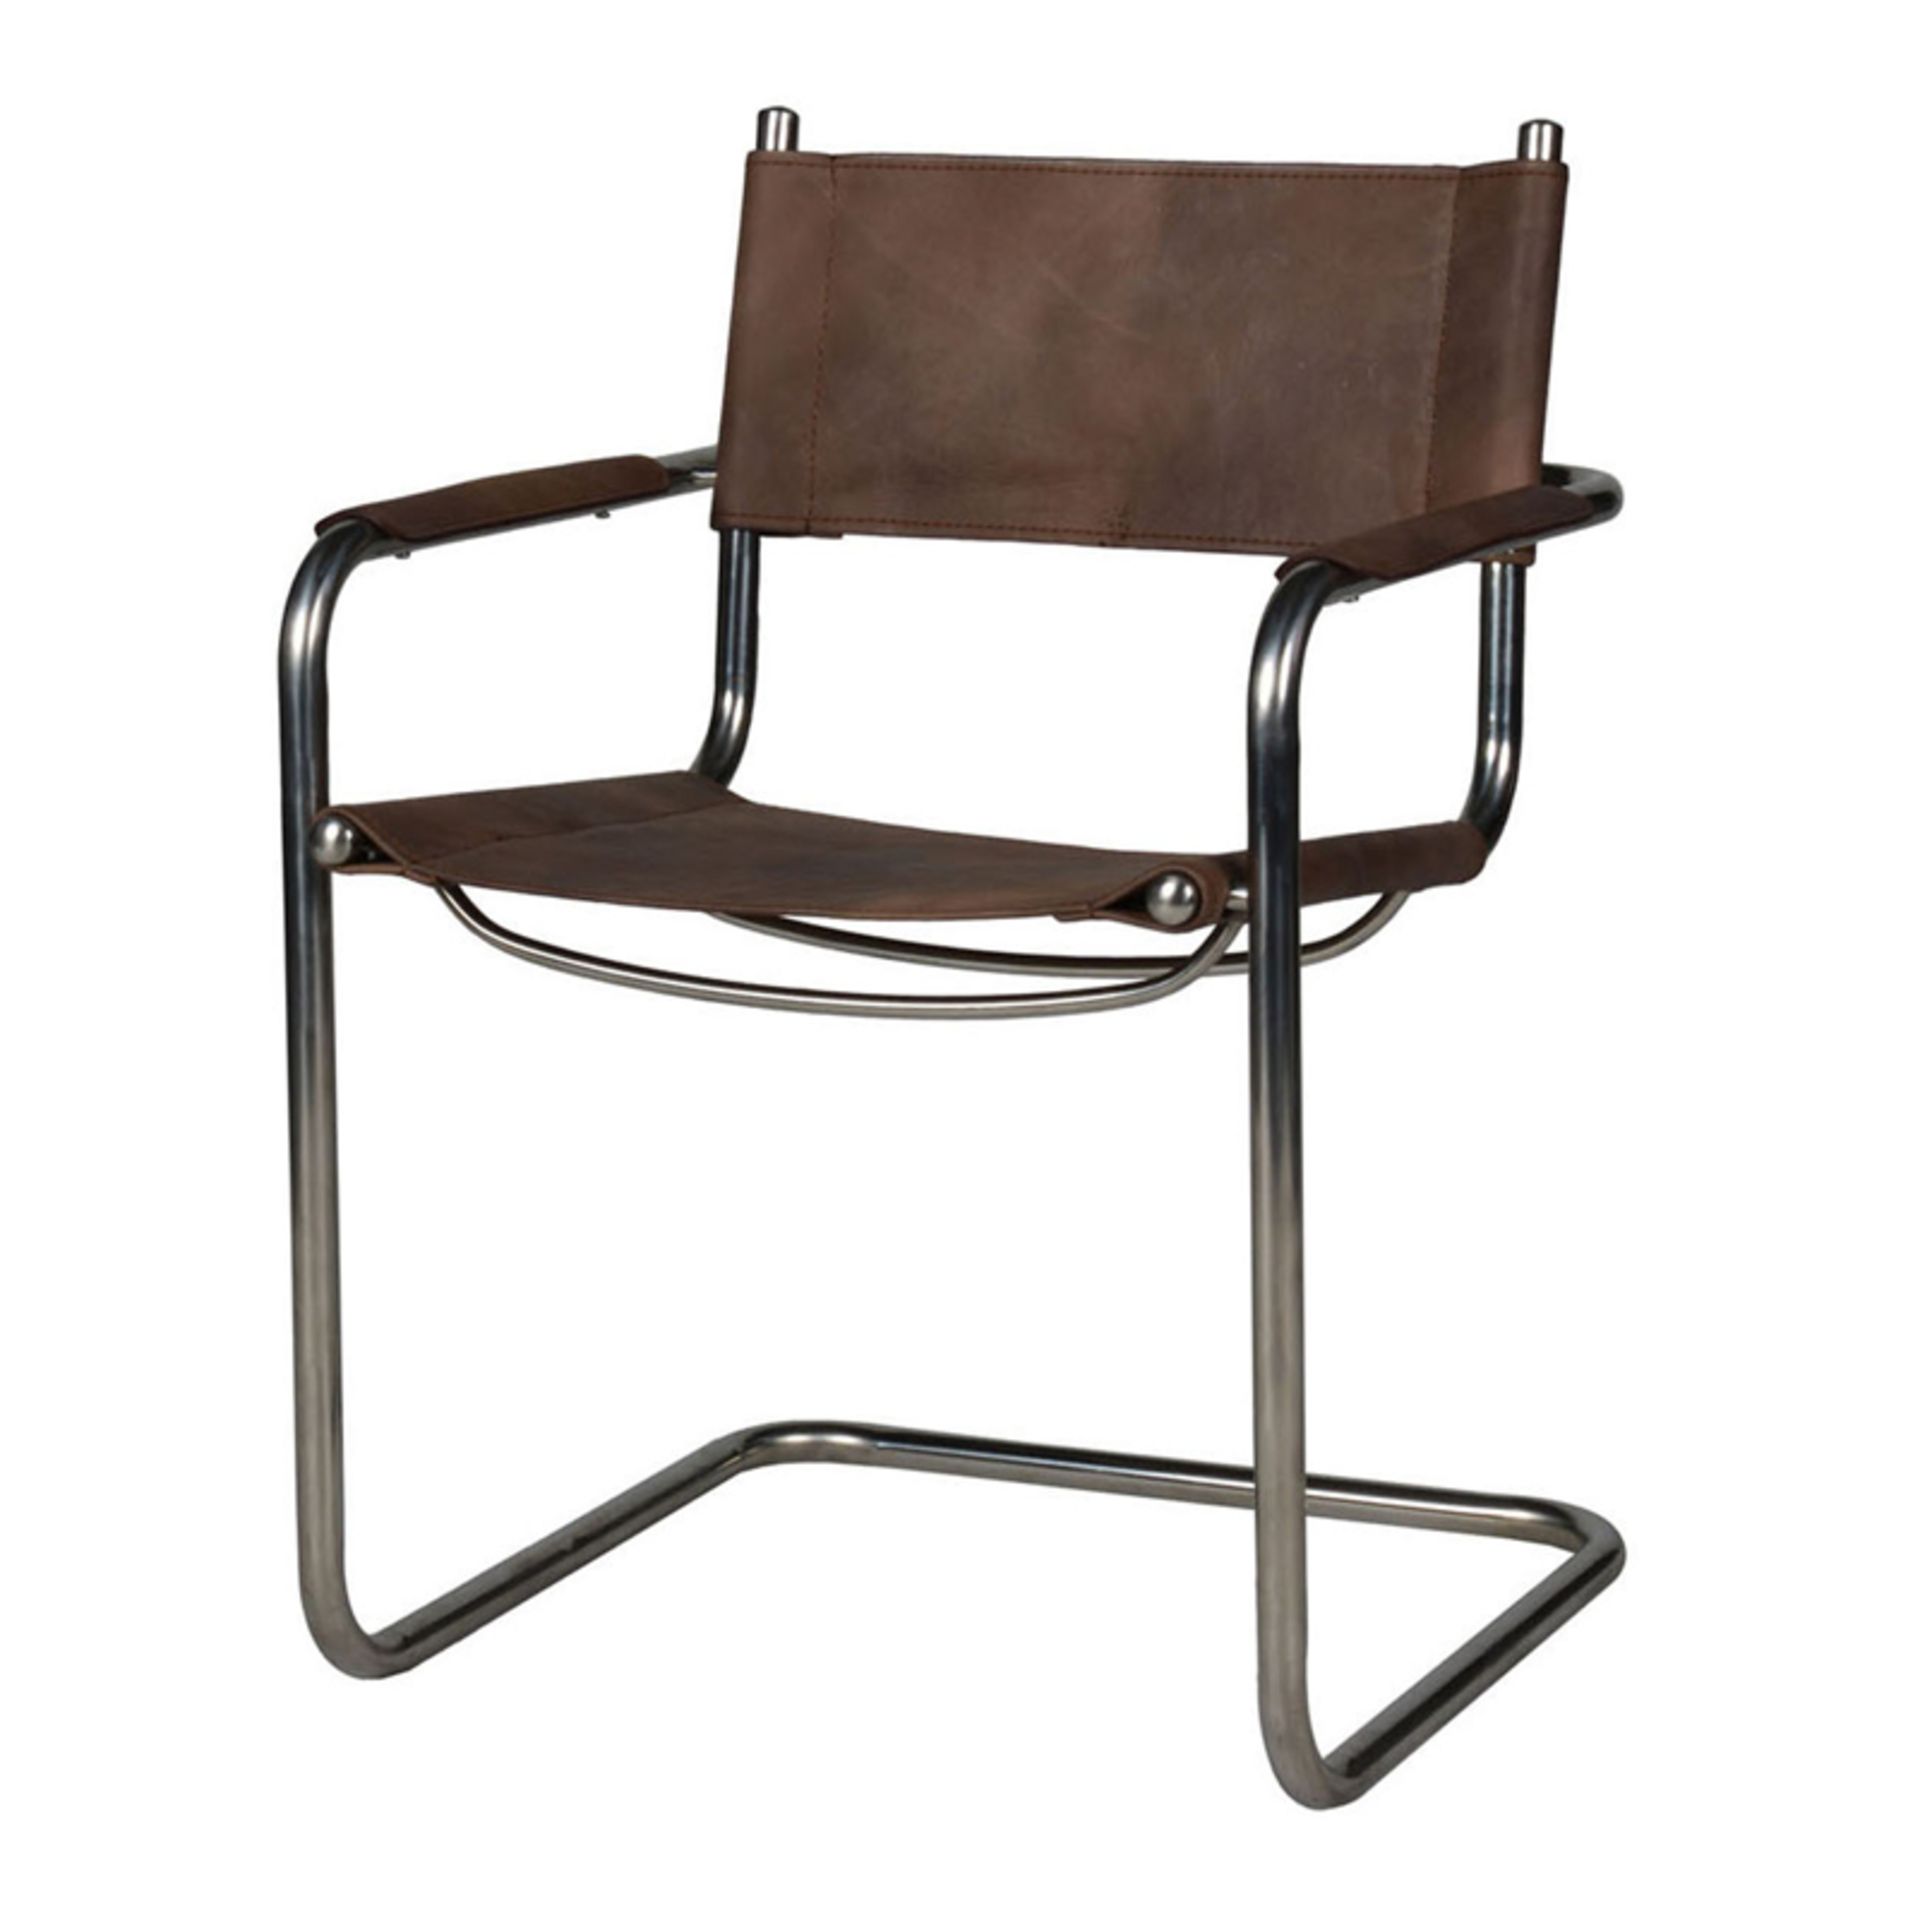 Hurlington Dining Chair Destroyed Raw Leather & Shiny Steel 60 x 58 x 82cm The Iconic Club Chair